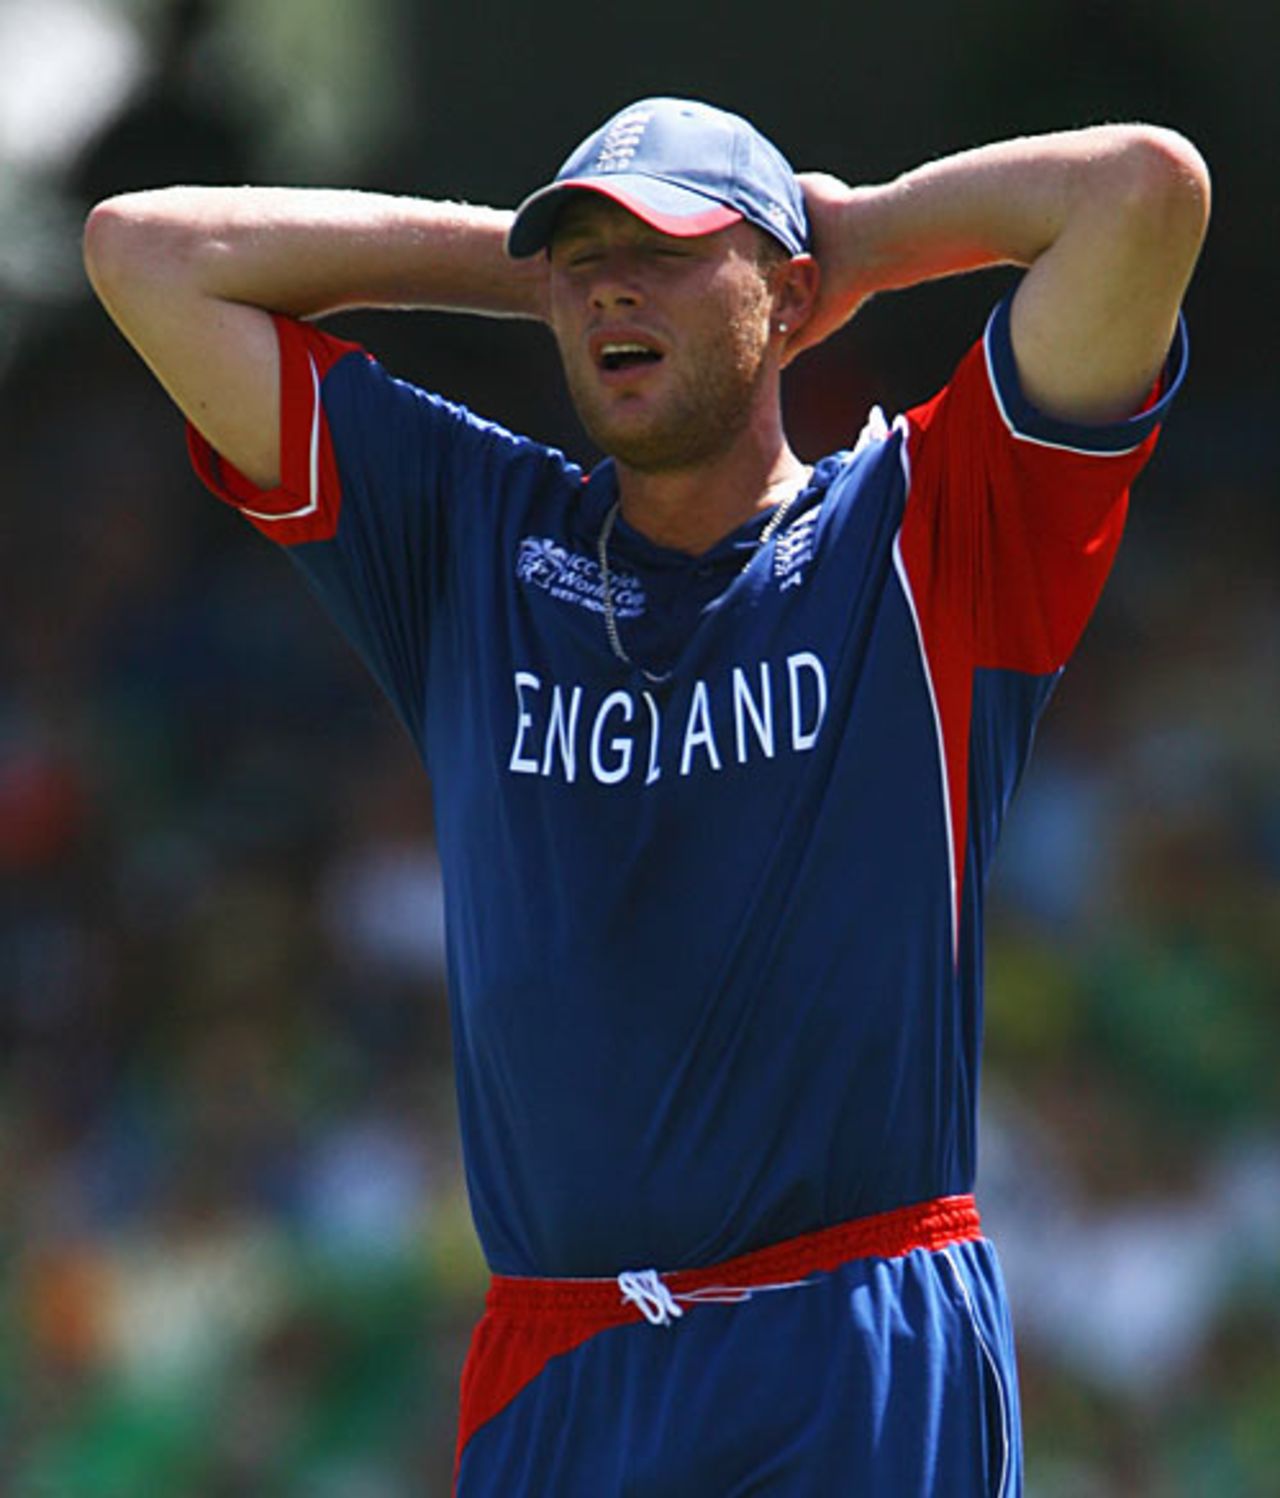 Andrew Flintoff stands with hands on head as South Africa administer England a drubbing, England v South Africa, Super Eights, Barbados, April 17, 2007